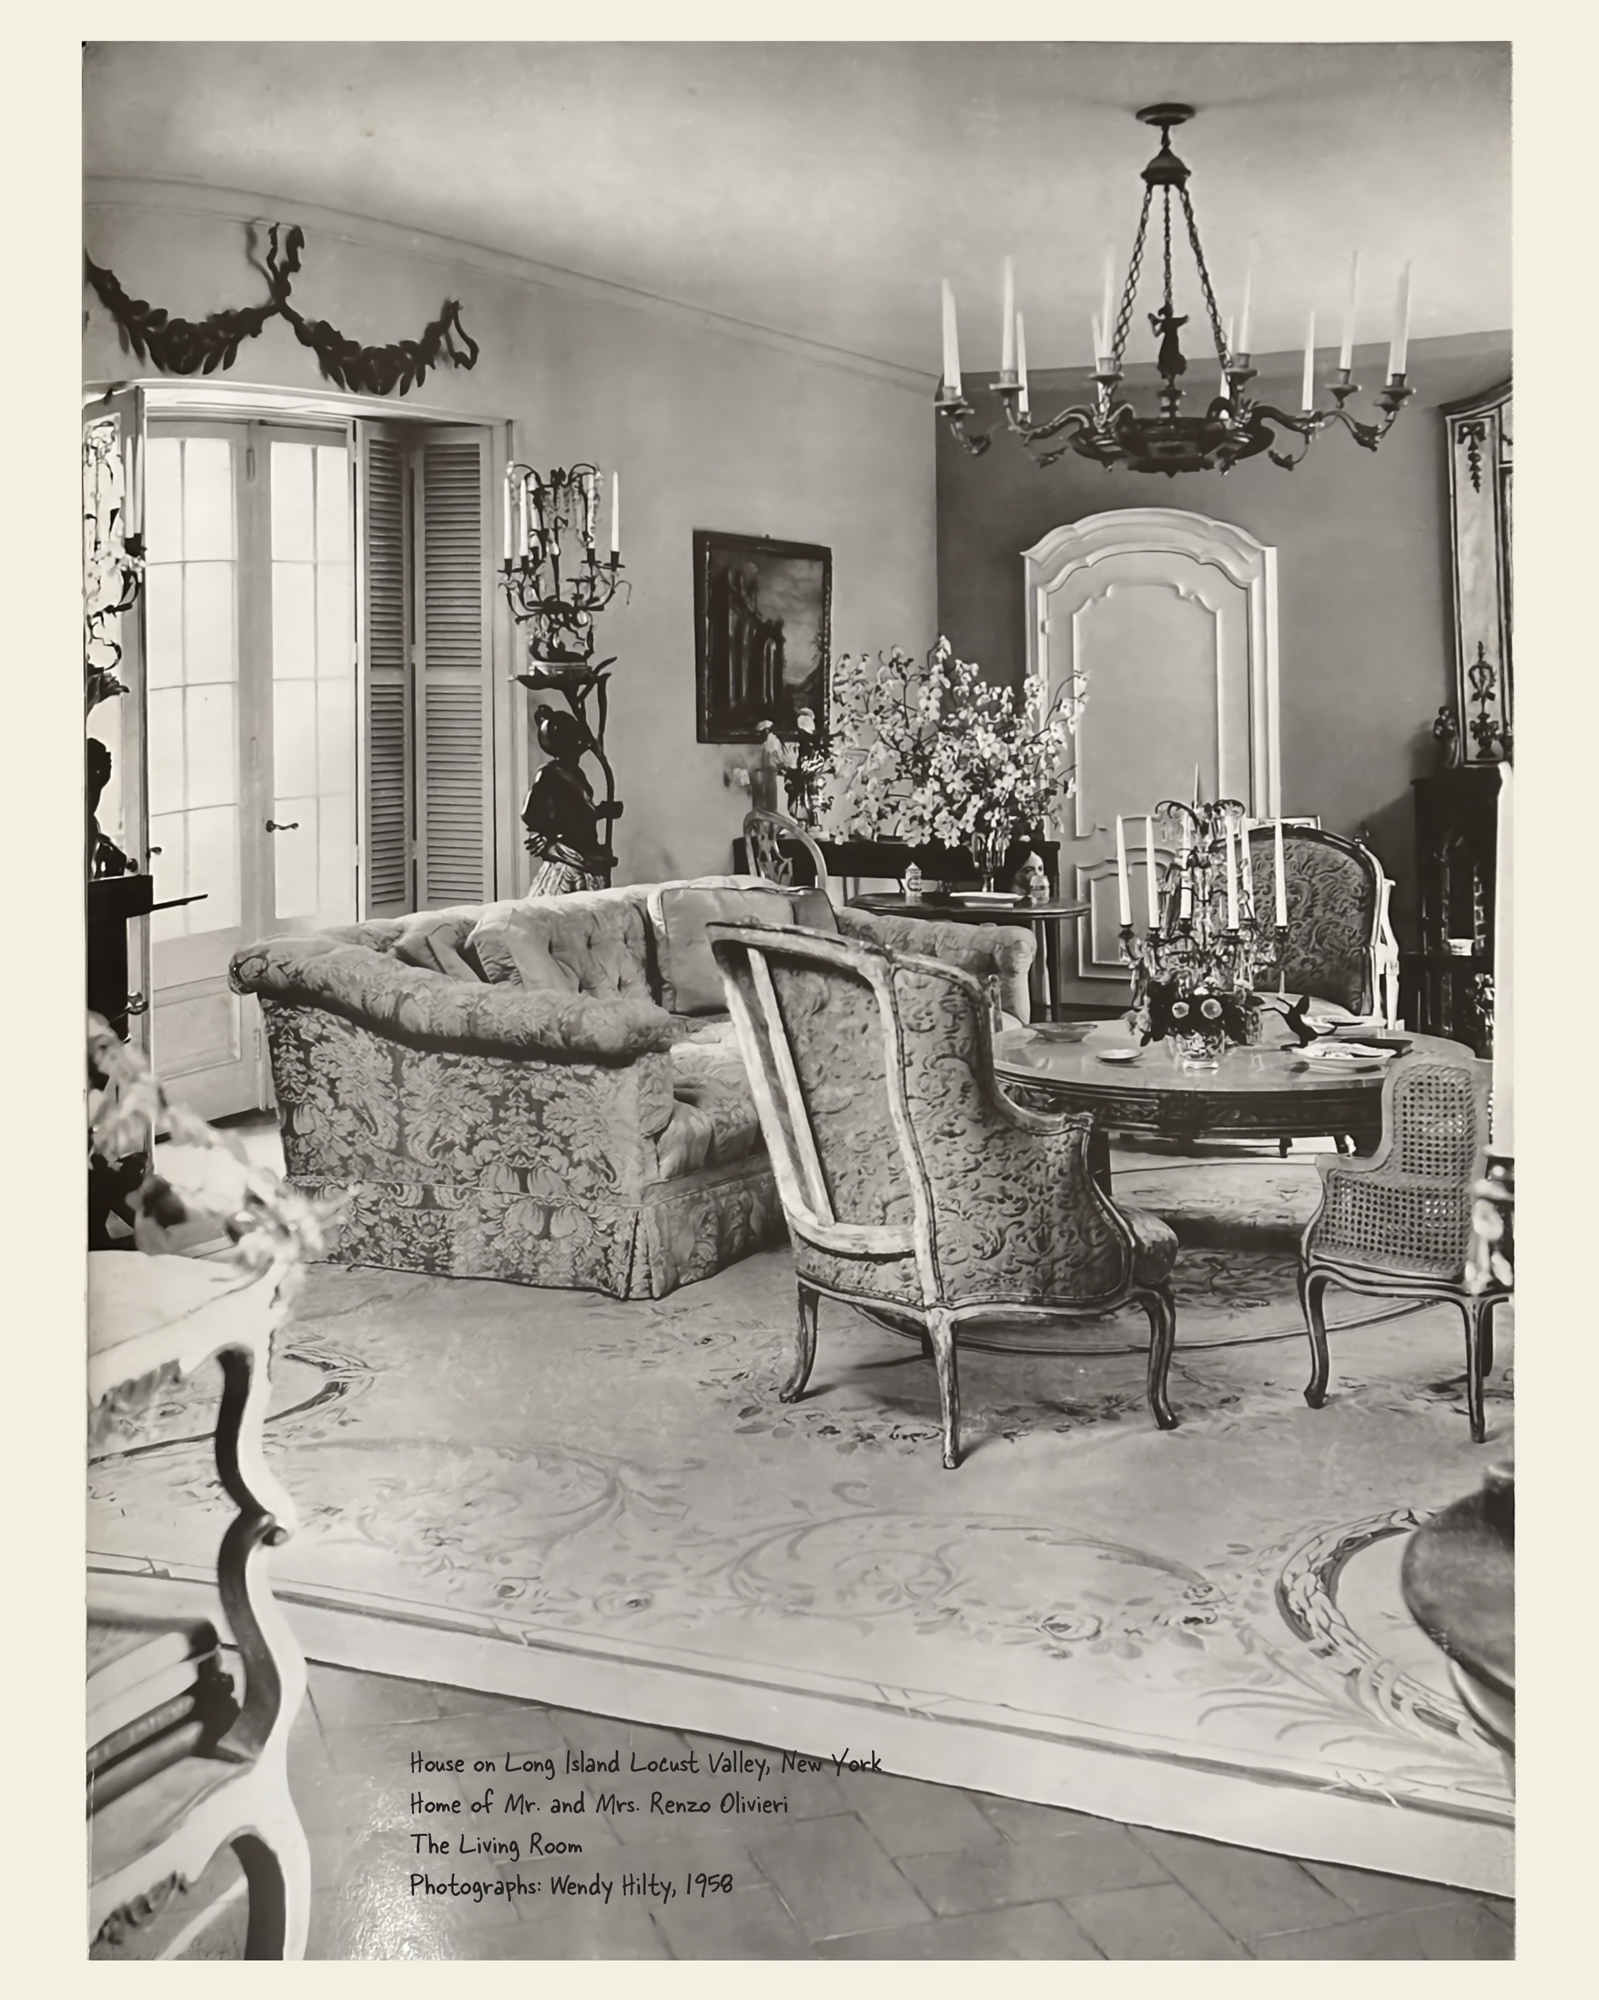 1958 : House on Long Island Locust Valley, New York Home of Mr. And Mrs. Renzo Olivieri The Living Room